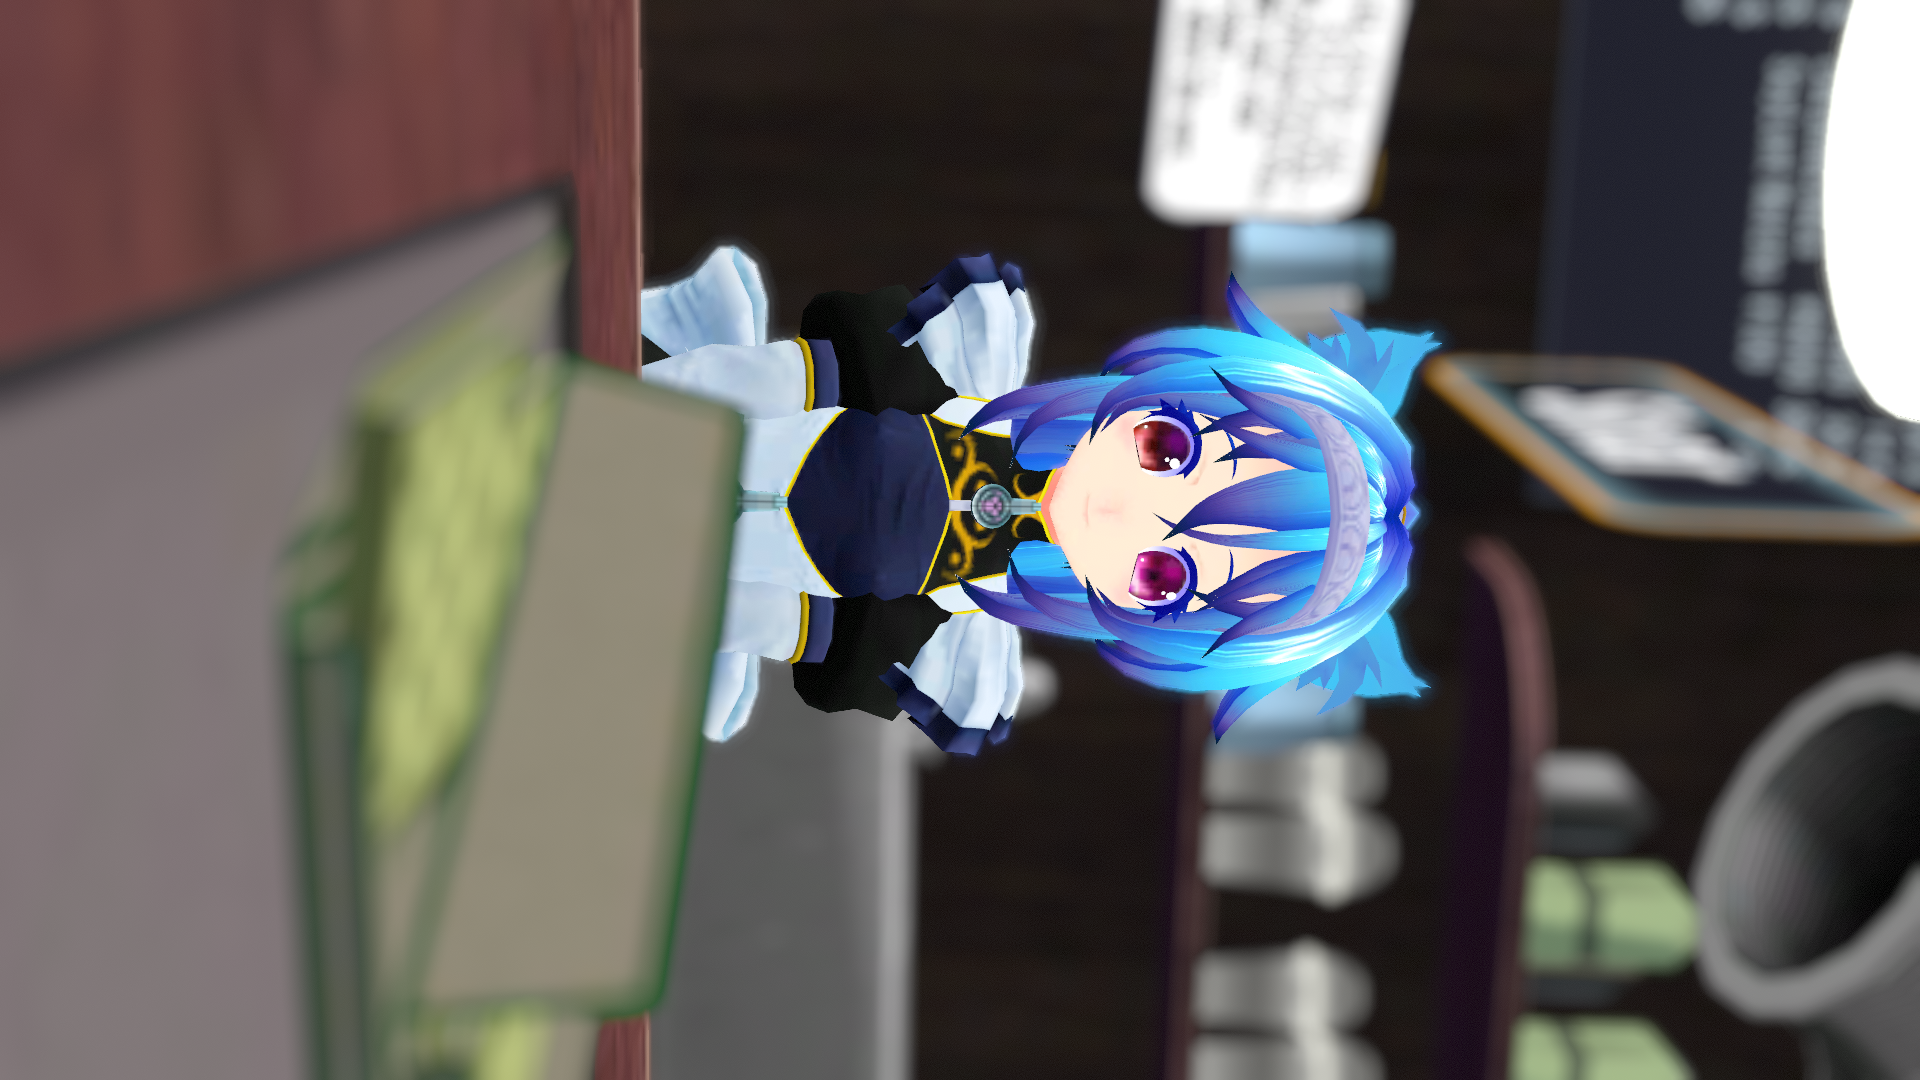 VRChat_1920x1080_2021-12-05_06-02-15.659.png